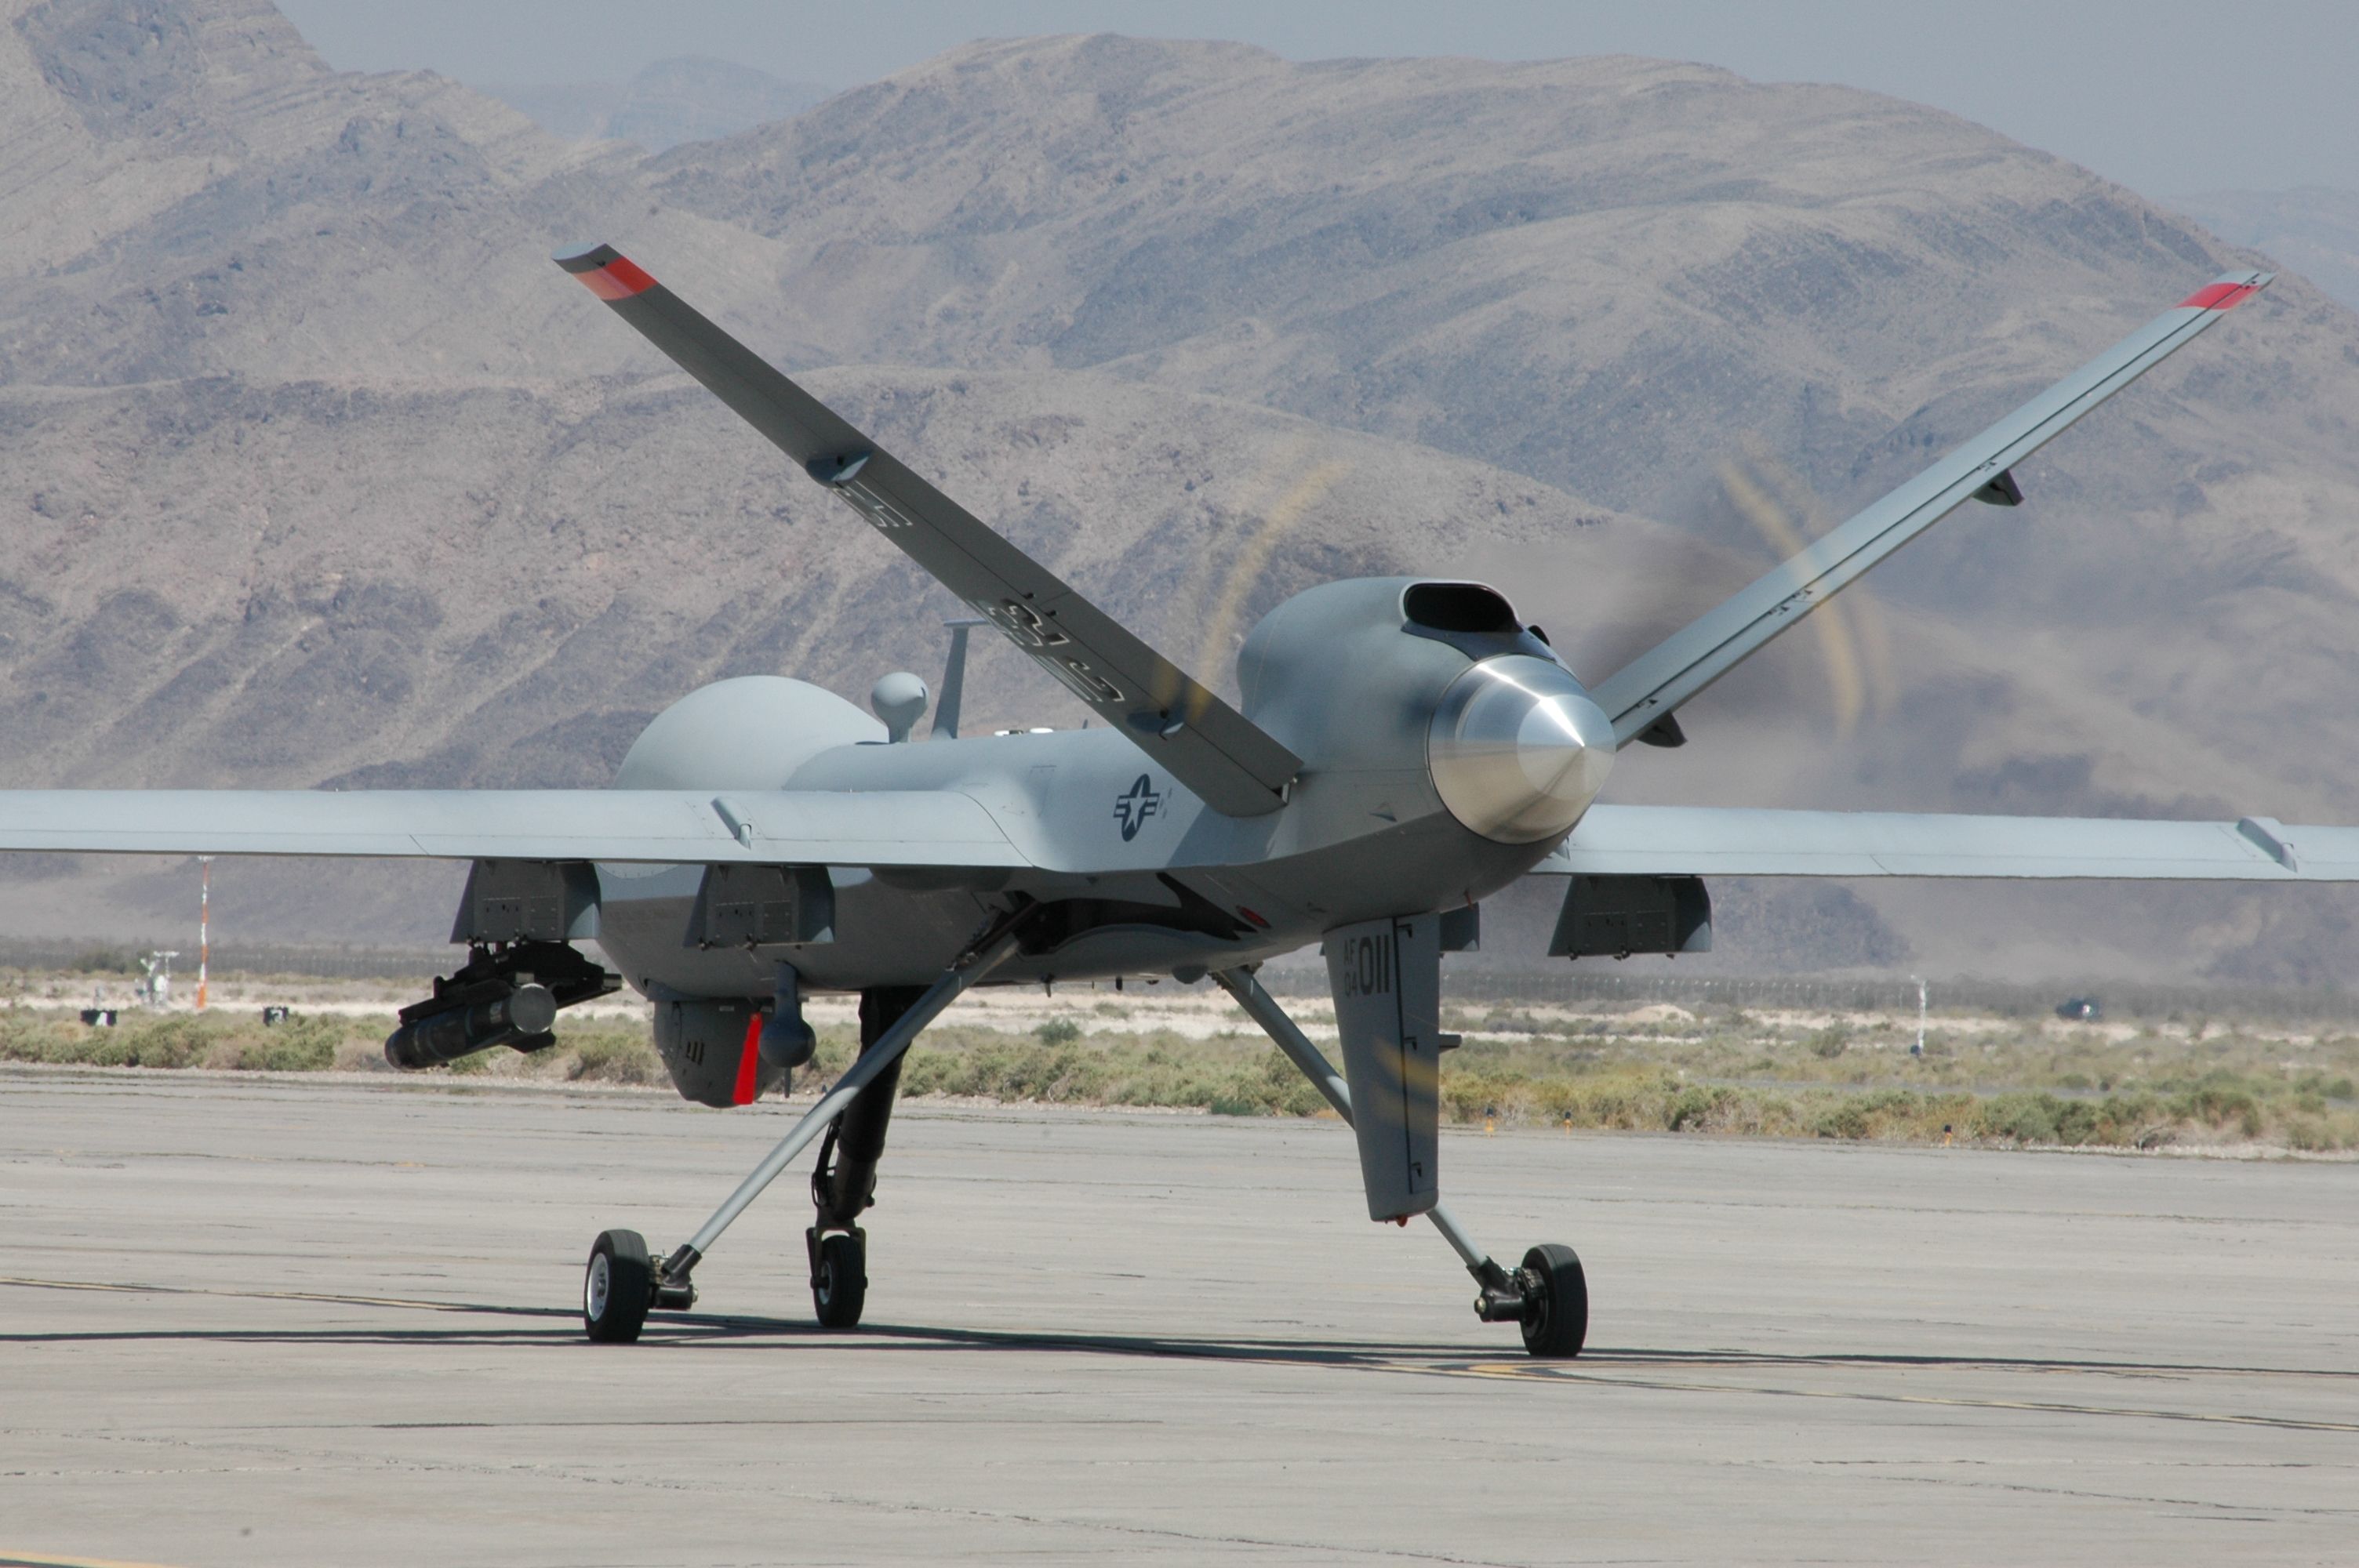 MQ9 Reaper: Unmanned Aerial Vehicle Back View 2. Military Drone, Unmanned Aerial Vehicle, Drone Technology